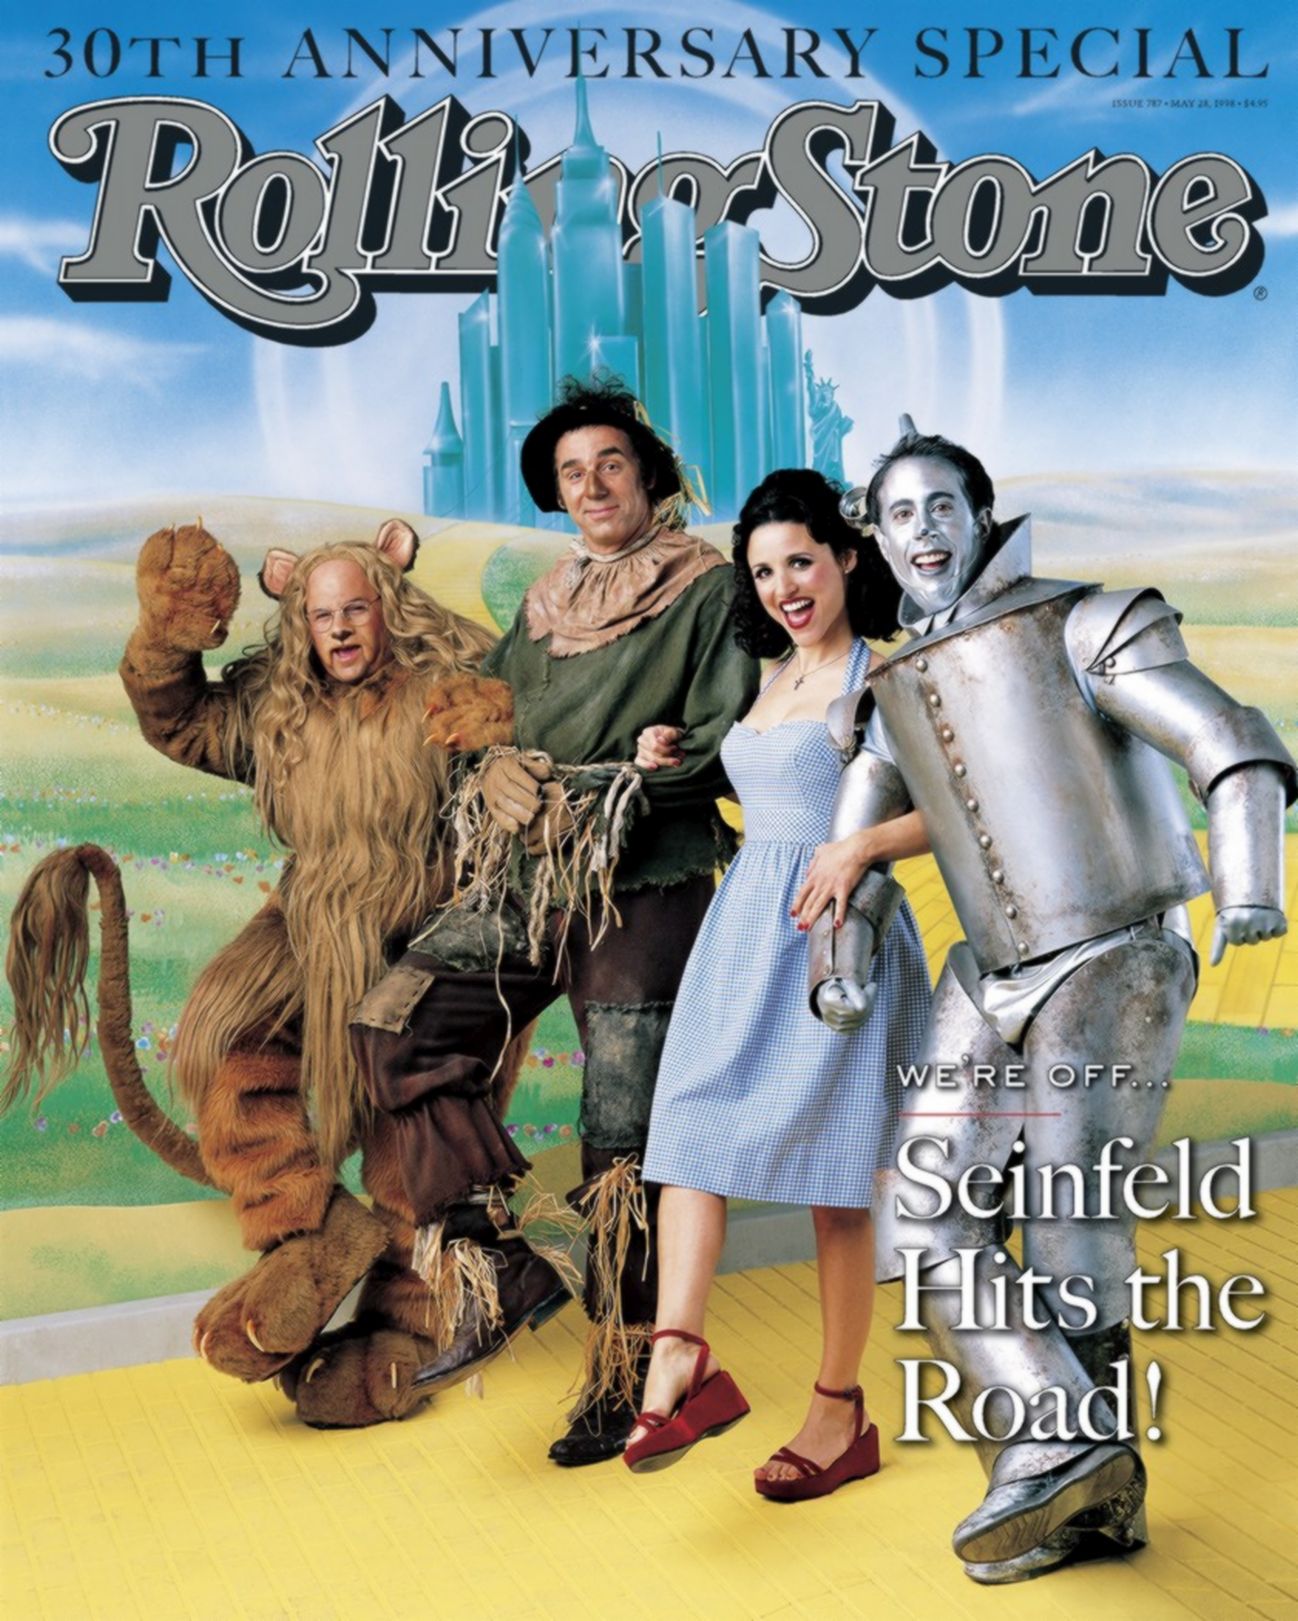 Seinfeld Magazine Cover The Wizard Of Oz Statue Of Liberty Julia Louis Dreyfus Looking At Viewer Tin 1298x1621